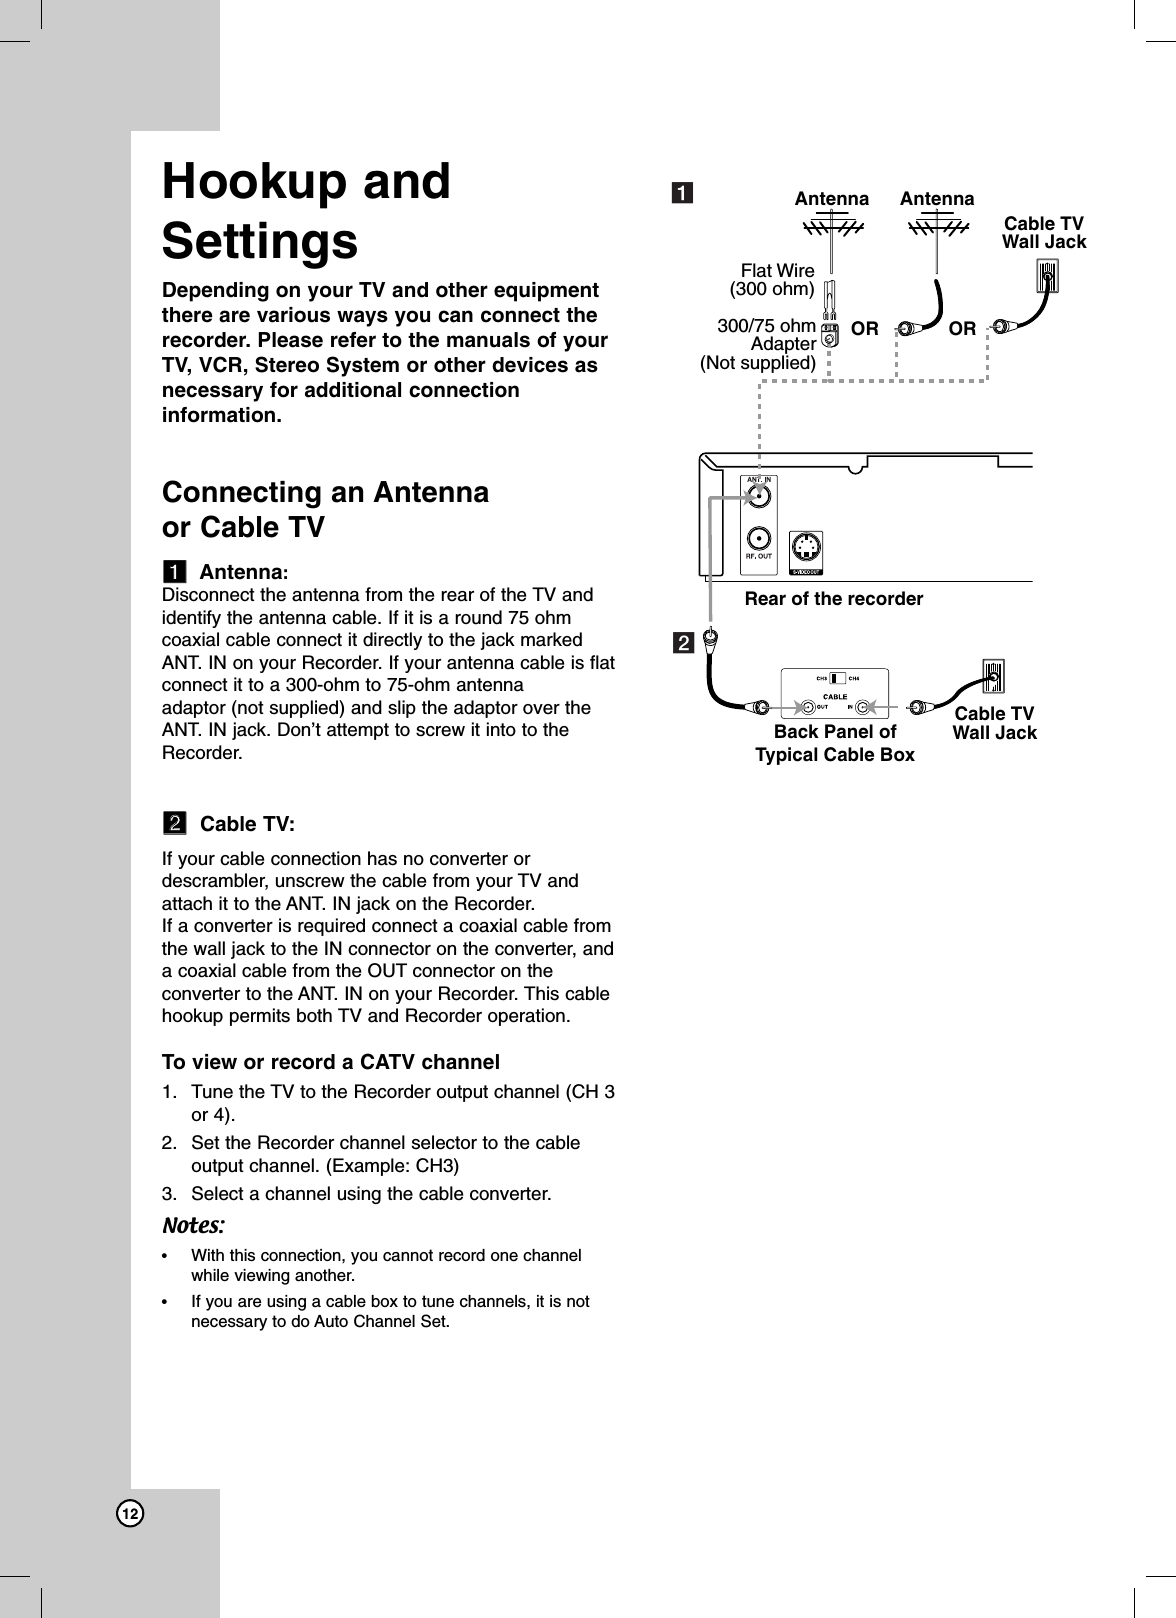 12Hookup andSettingsDepending on your TV and other equipmentthere are various ways you can connect therecorder. Please refer to the manuals of yourTV, VCR, Stereo System or other devices asnecessary for additional connectioninformation.Connecting an Antenna or Cable TVaaAntenna:Disconnect the antenna from the rear of the TV andidentify the antenna cable. If it is a round 75 ohmcoaxial cable connect it directly to the jack markedANT. IN on your Recorder. If your antenna cable is flatconnect it to a 300-ohm to 75-ohm antenna adaptor (not supplied) and slip the adaptor over theANT. IN jack. Don’t attempt to screw it into to theRecorder.bbCable TV:If your cable connection has no converter ordescrambler, unscrew the cable from your TV andattach it to the ANT. IN jack on the Recorder. If a converter is required connect a coaxial cable fromthe wall jack to the IN connector on the converter, anda coaxial cable from the OUT connector on theconverter to the ANT. IN on your Recorder. This cablehookup permits both TV and Recorder operation. To view or record a CATV channel1. Tune the TV to the Recorder output channel (CH 3or 4).2. Set the Recorder channel selector to the cableoutput channel. (Example: CH3)3. Select a channel using the cable converter.Notes:•With this connection, you cannot record one channelwhile viewing another.•If you are using a cable box to tune channels, it is notnecessary to do Auto Channel Set.AntennaRear of the recorderBack Panel ofTypical Cable BoxAntennaCable TVWall JackCable TVWall JackORFlat Wire(300 ohm)300/75 ohmAdapter(Not supplied)ORab